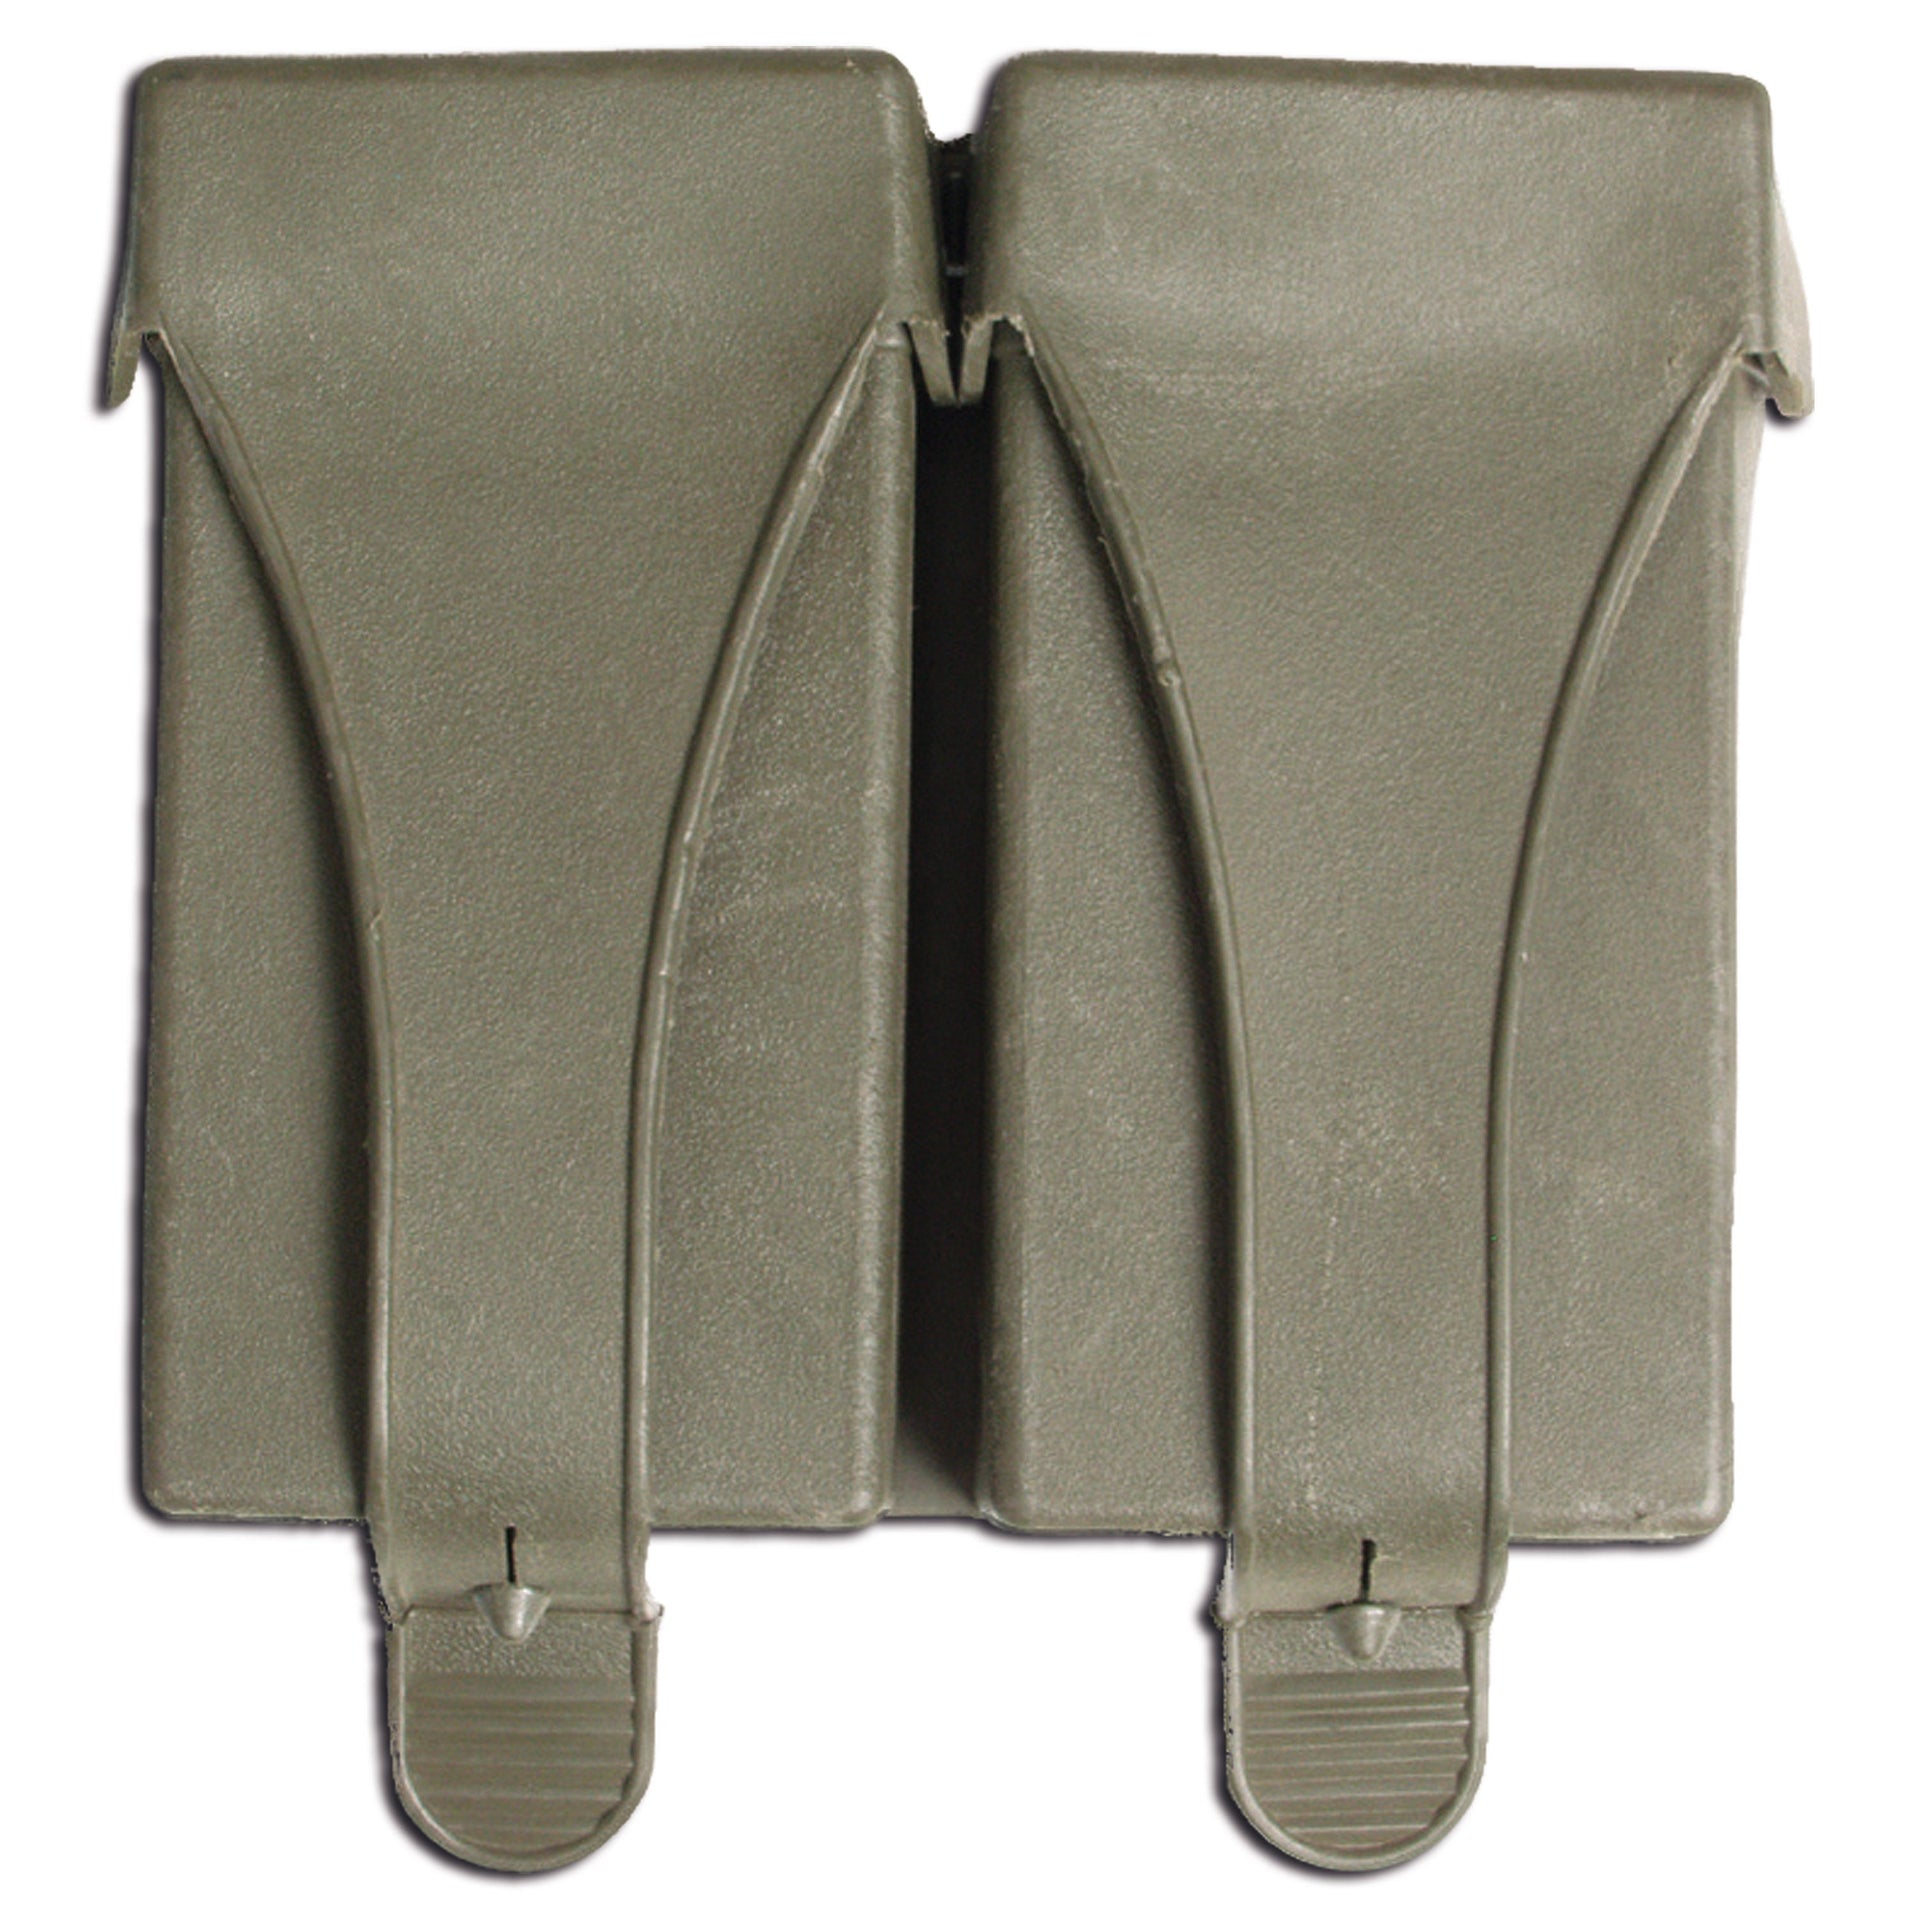 Magazine Pouch G3 New Version Used